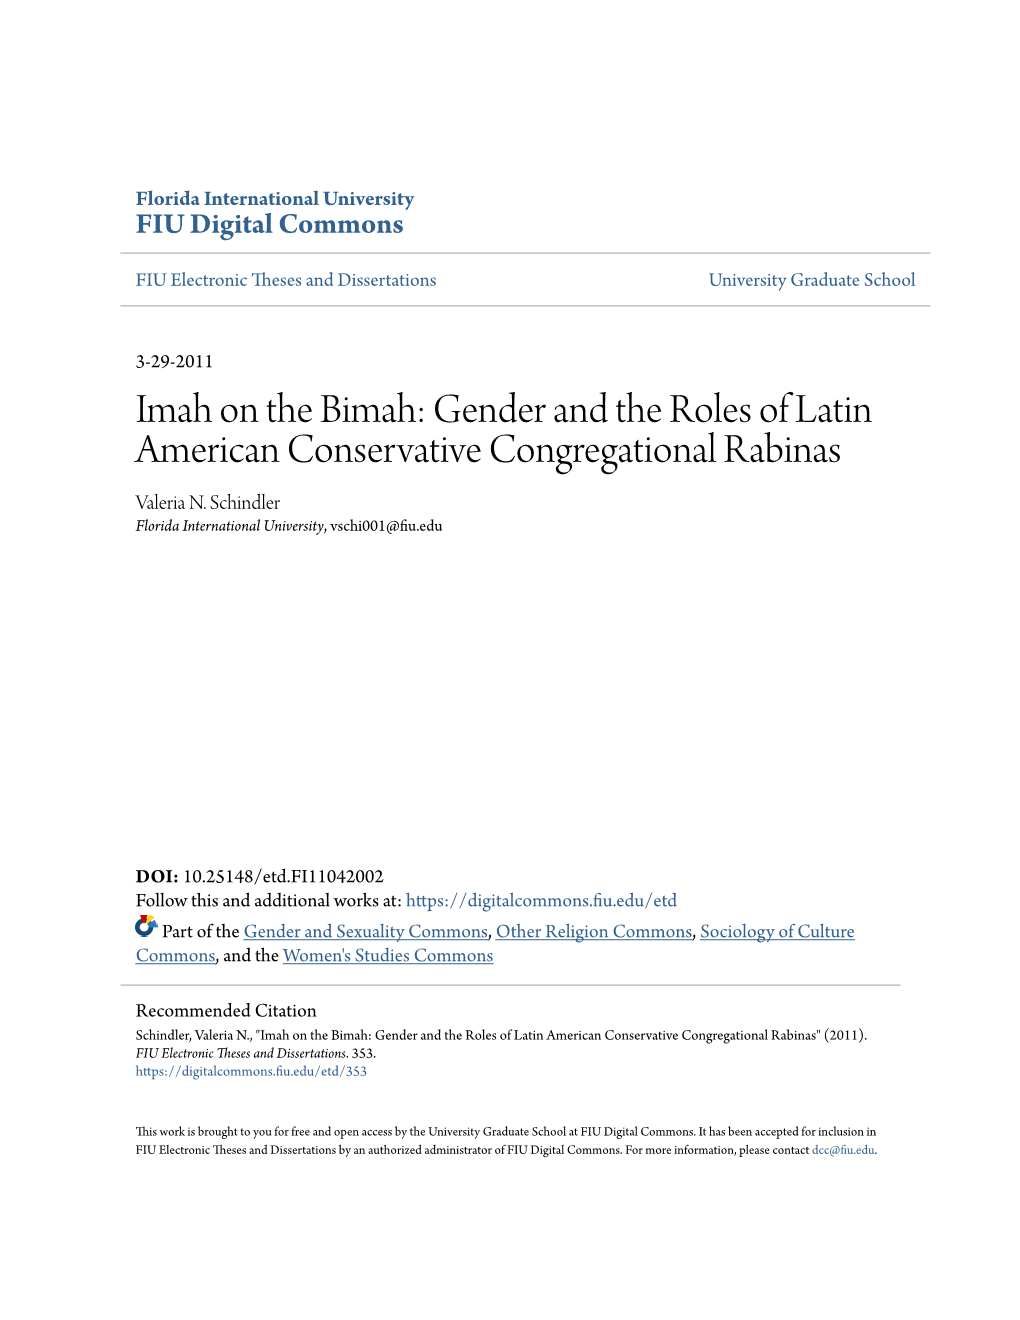 Imah on the Bimah: Gender and the Roles of Latin American Conservative Congregational Rabinas Valeria N